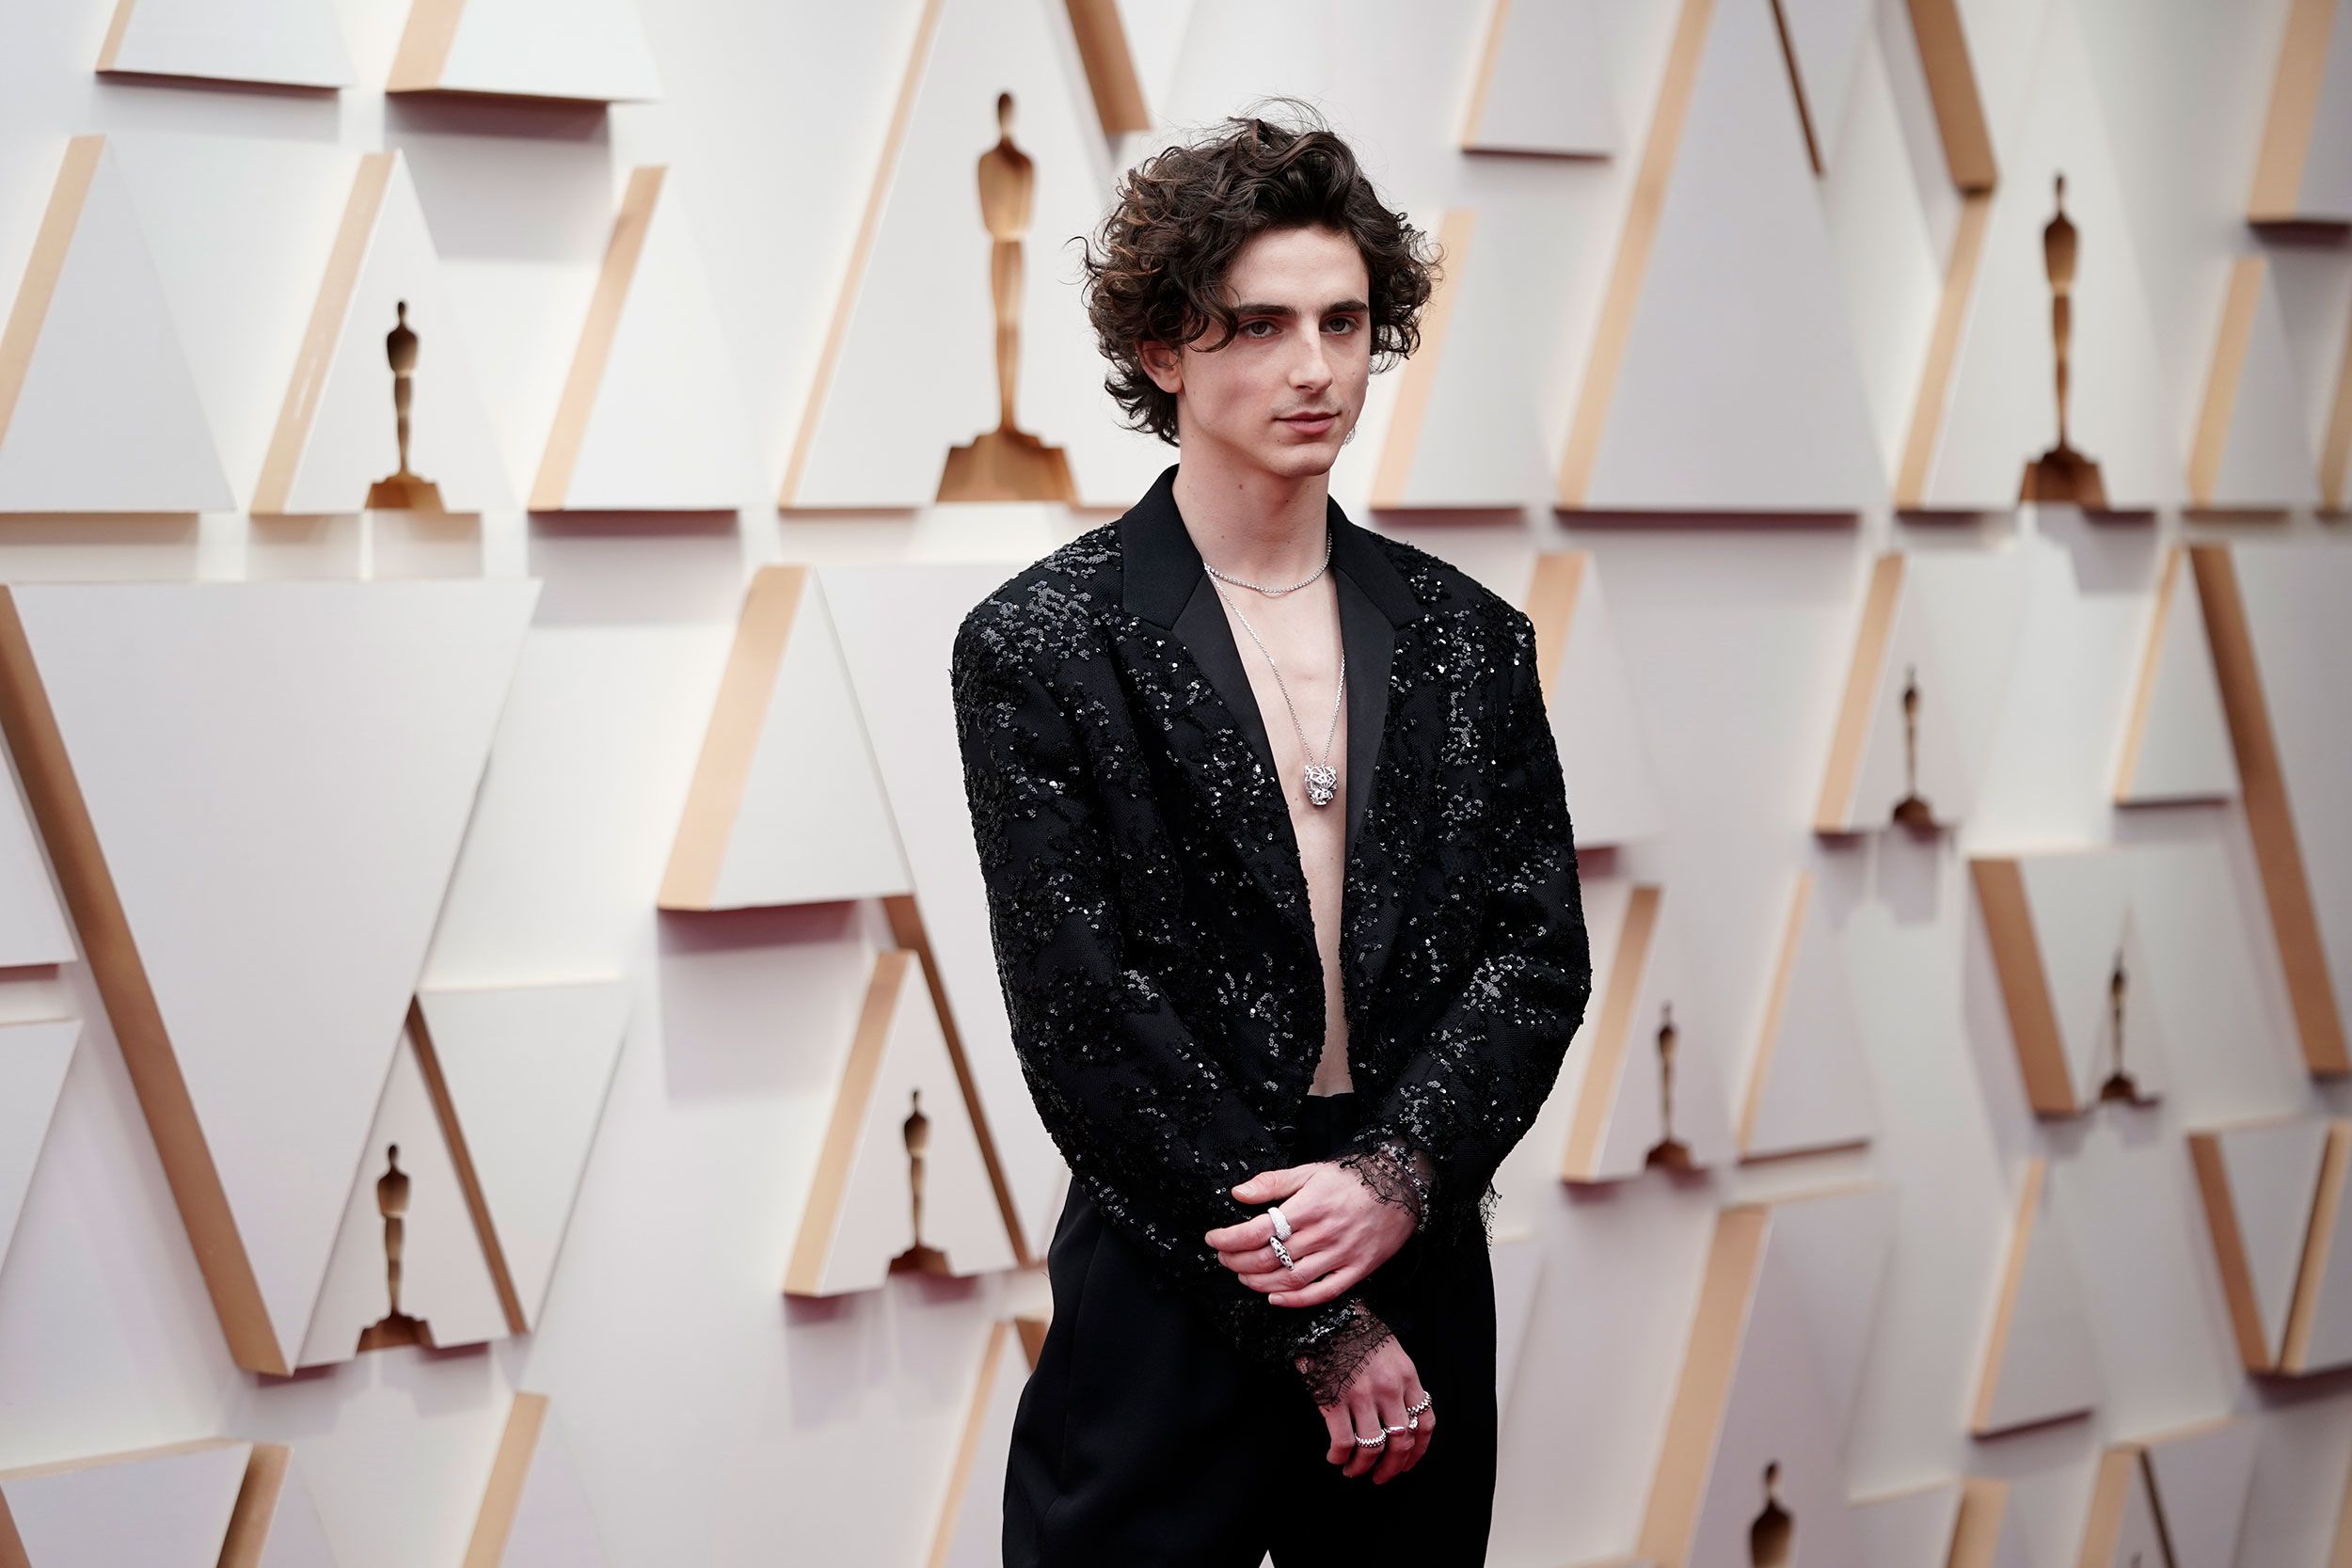 Timothee Chalamet wore womenswear at the Oscars